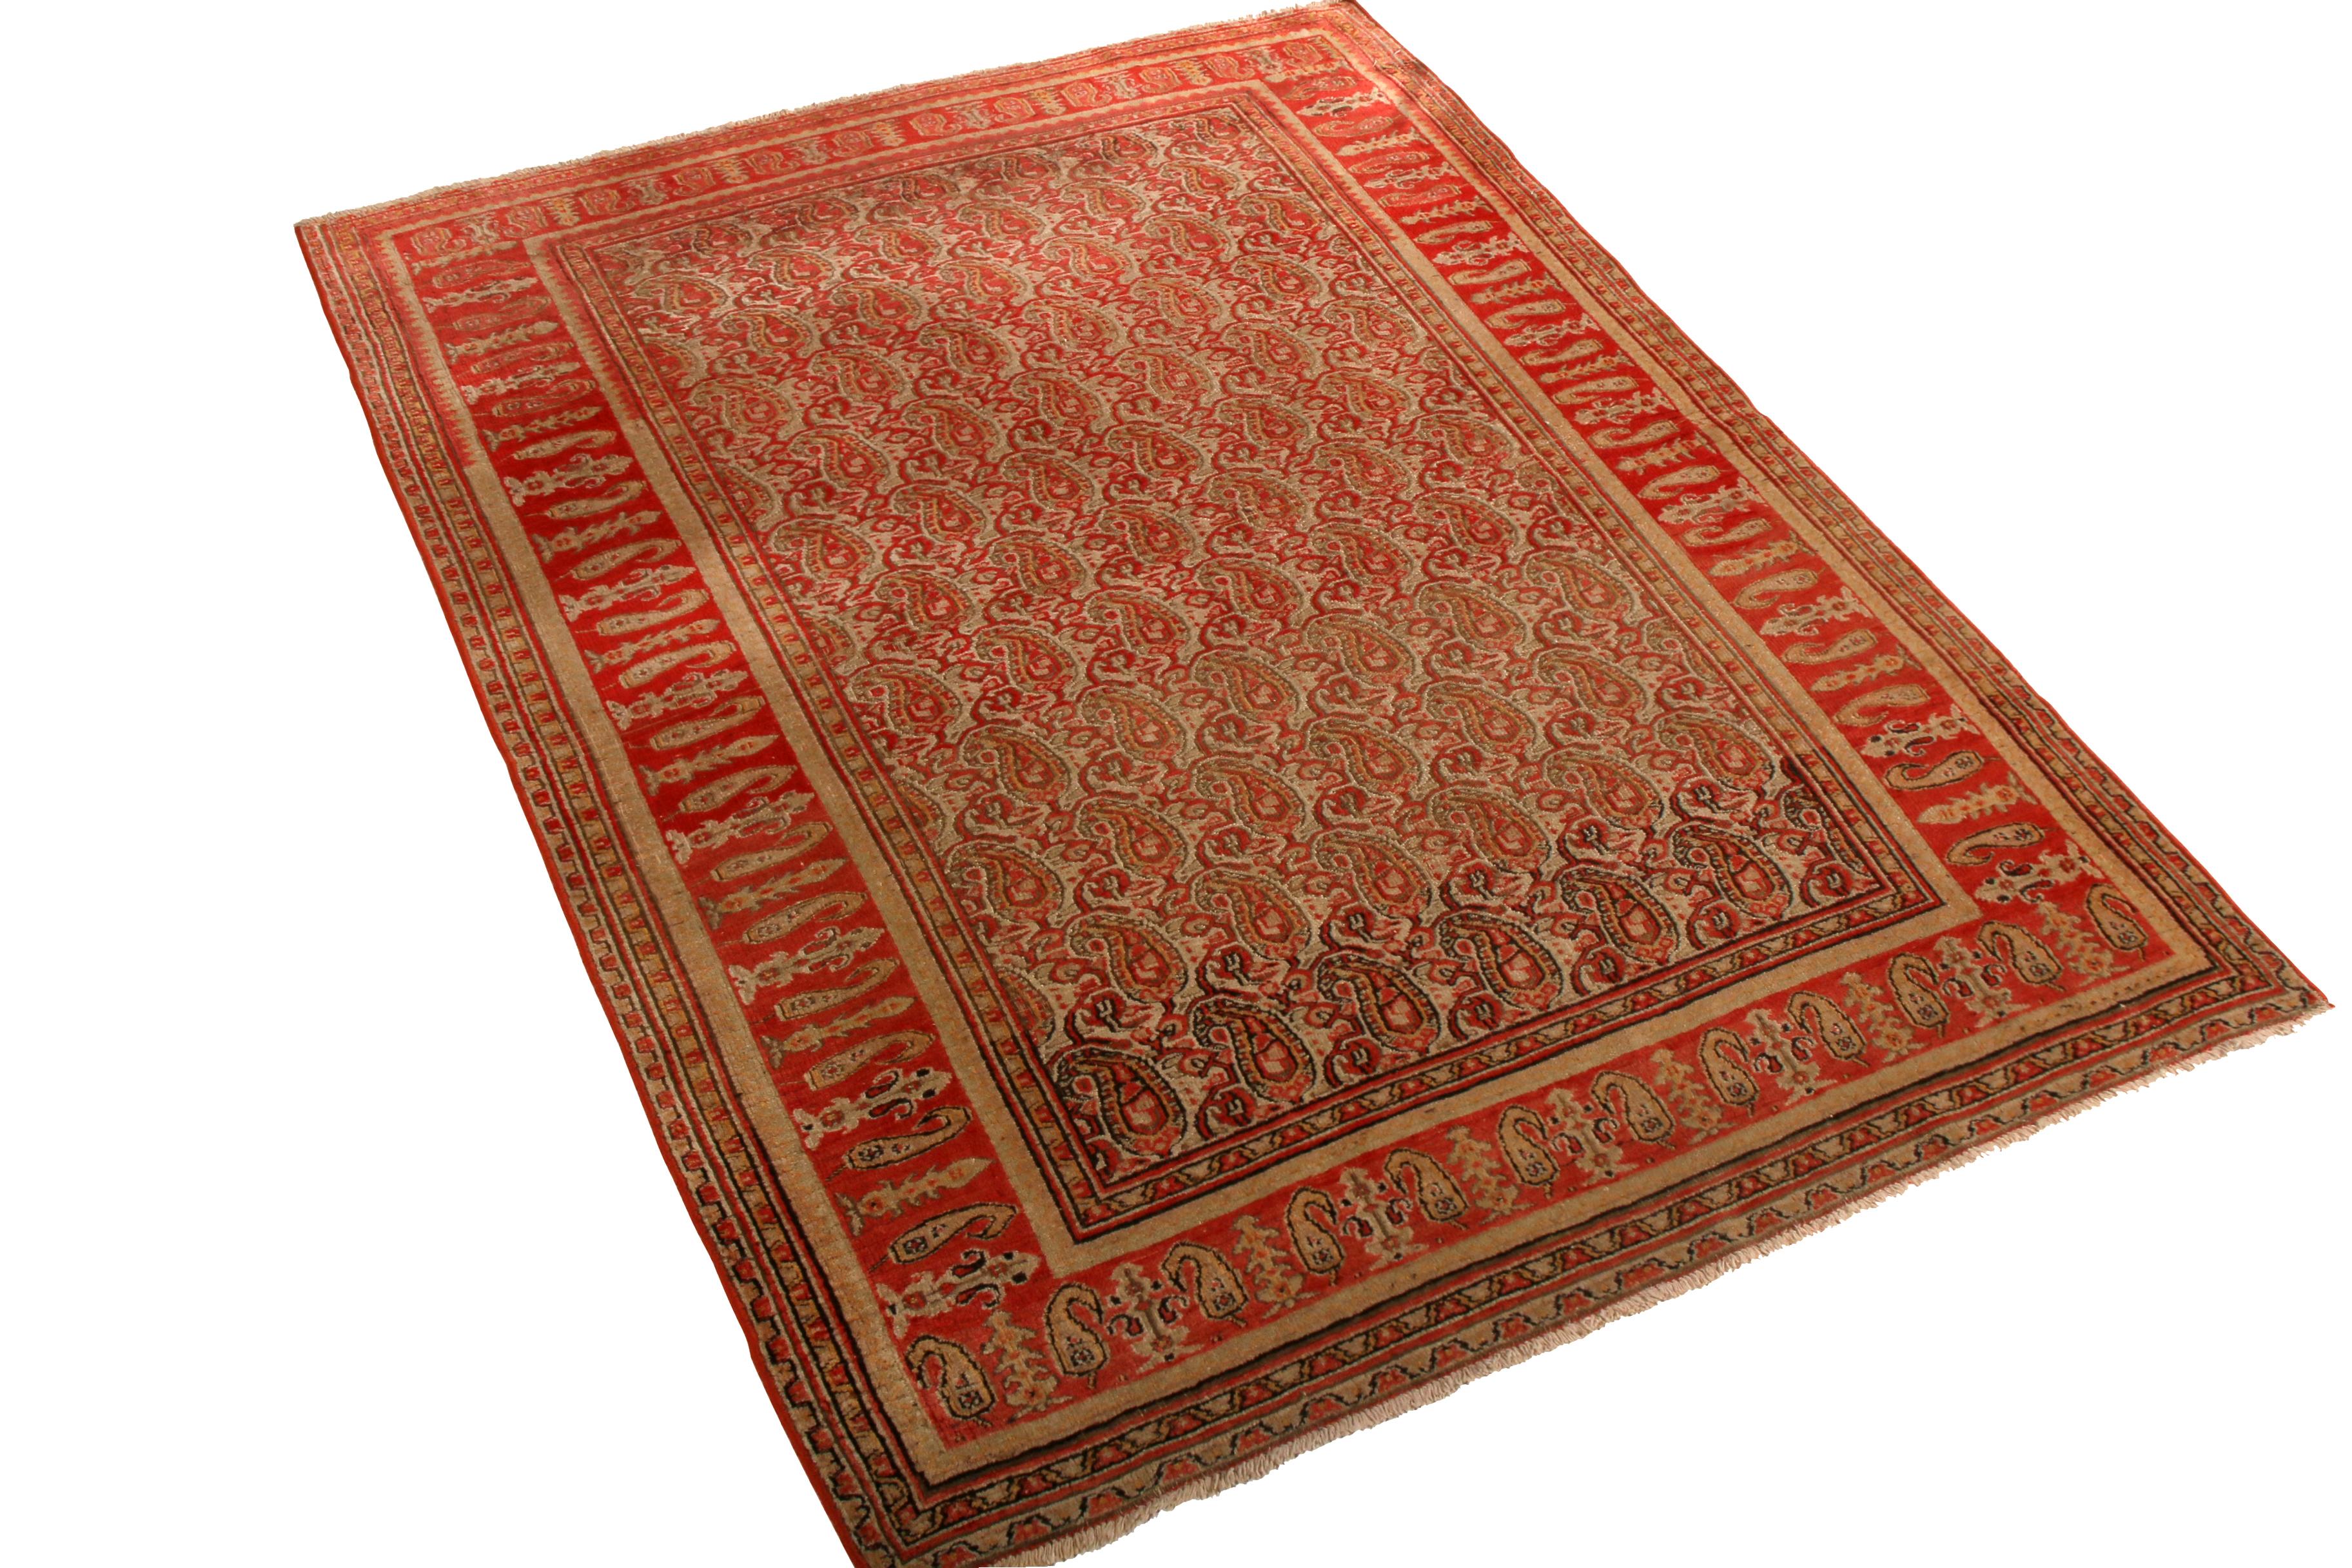 Hand knotted in wool originating from the Persian province of the same name between 1900-1910, this antique Doroksh rug hails from a region acclaimed for rarities ideal for interior decoration, employing a notably rich traditional colorway in pair